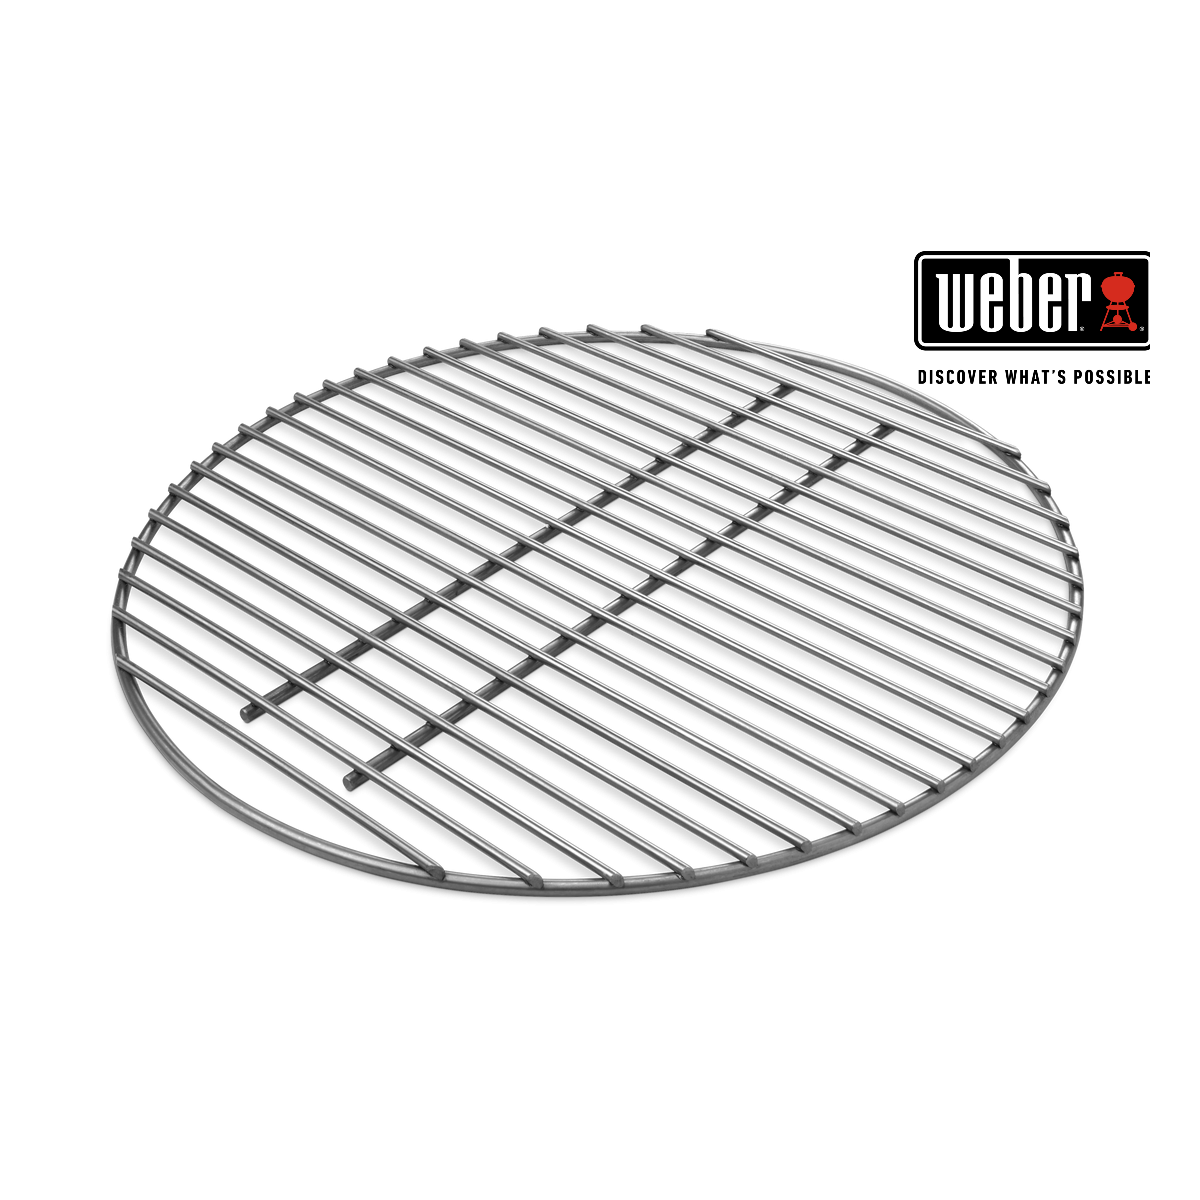 WEBER grill coal roast size 43cm for BBQ 57cm, 7441